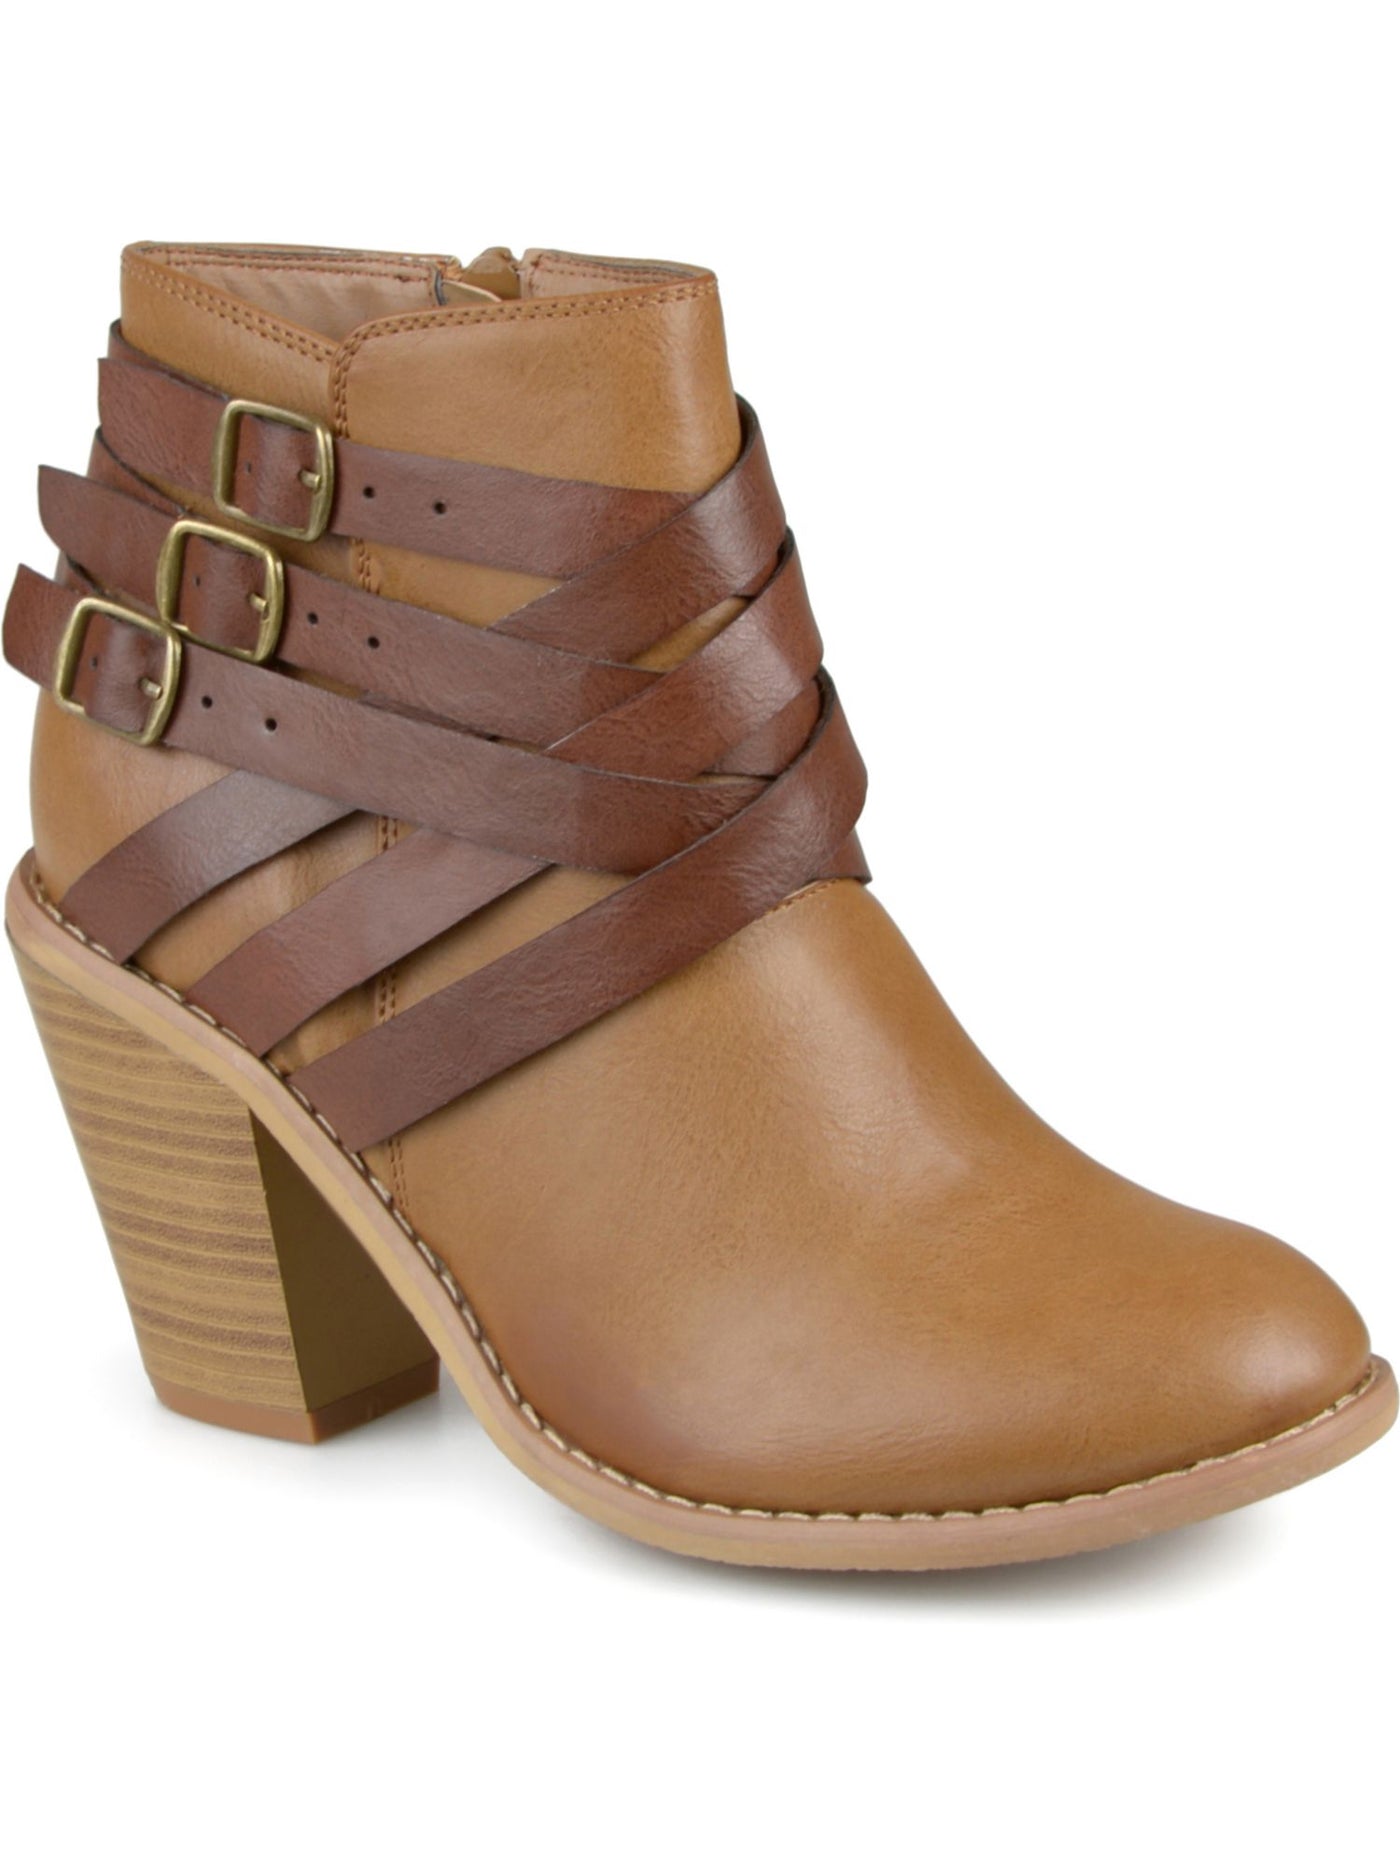 JOURNEE COLLECTION Womens Tan Beige Padded Buckle Accent Strap Stacked Heel Zip-Up Booties 8 W